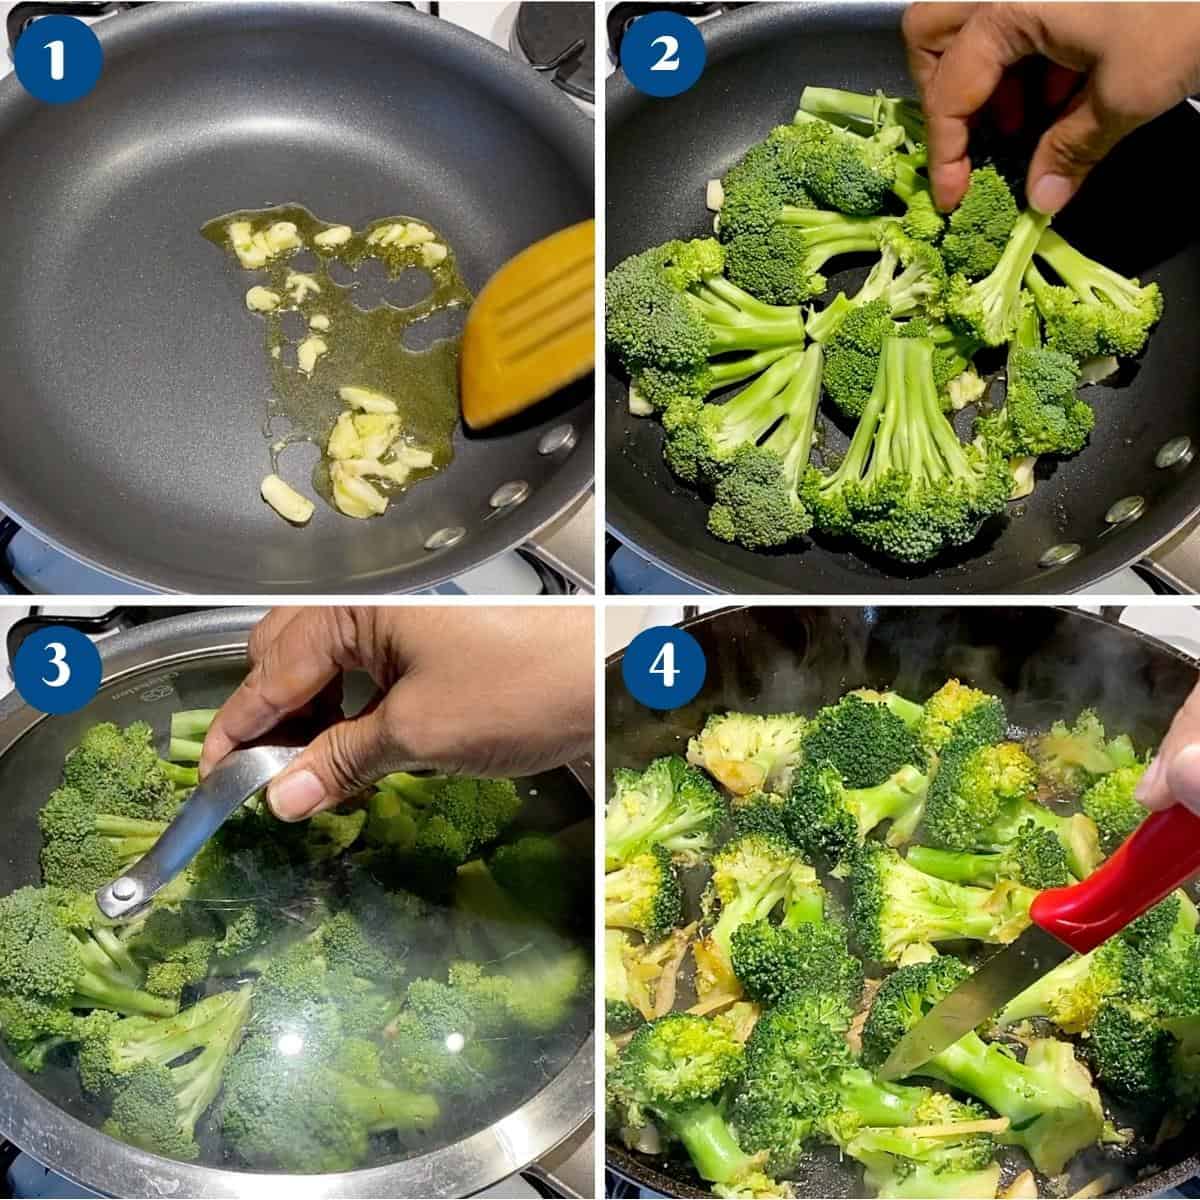 Progress pictures for broccoli sautéed with cranberries.